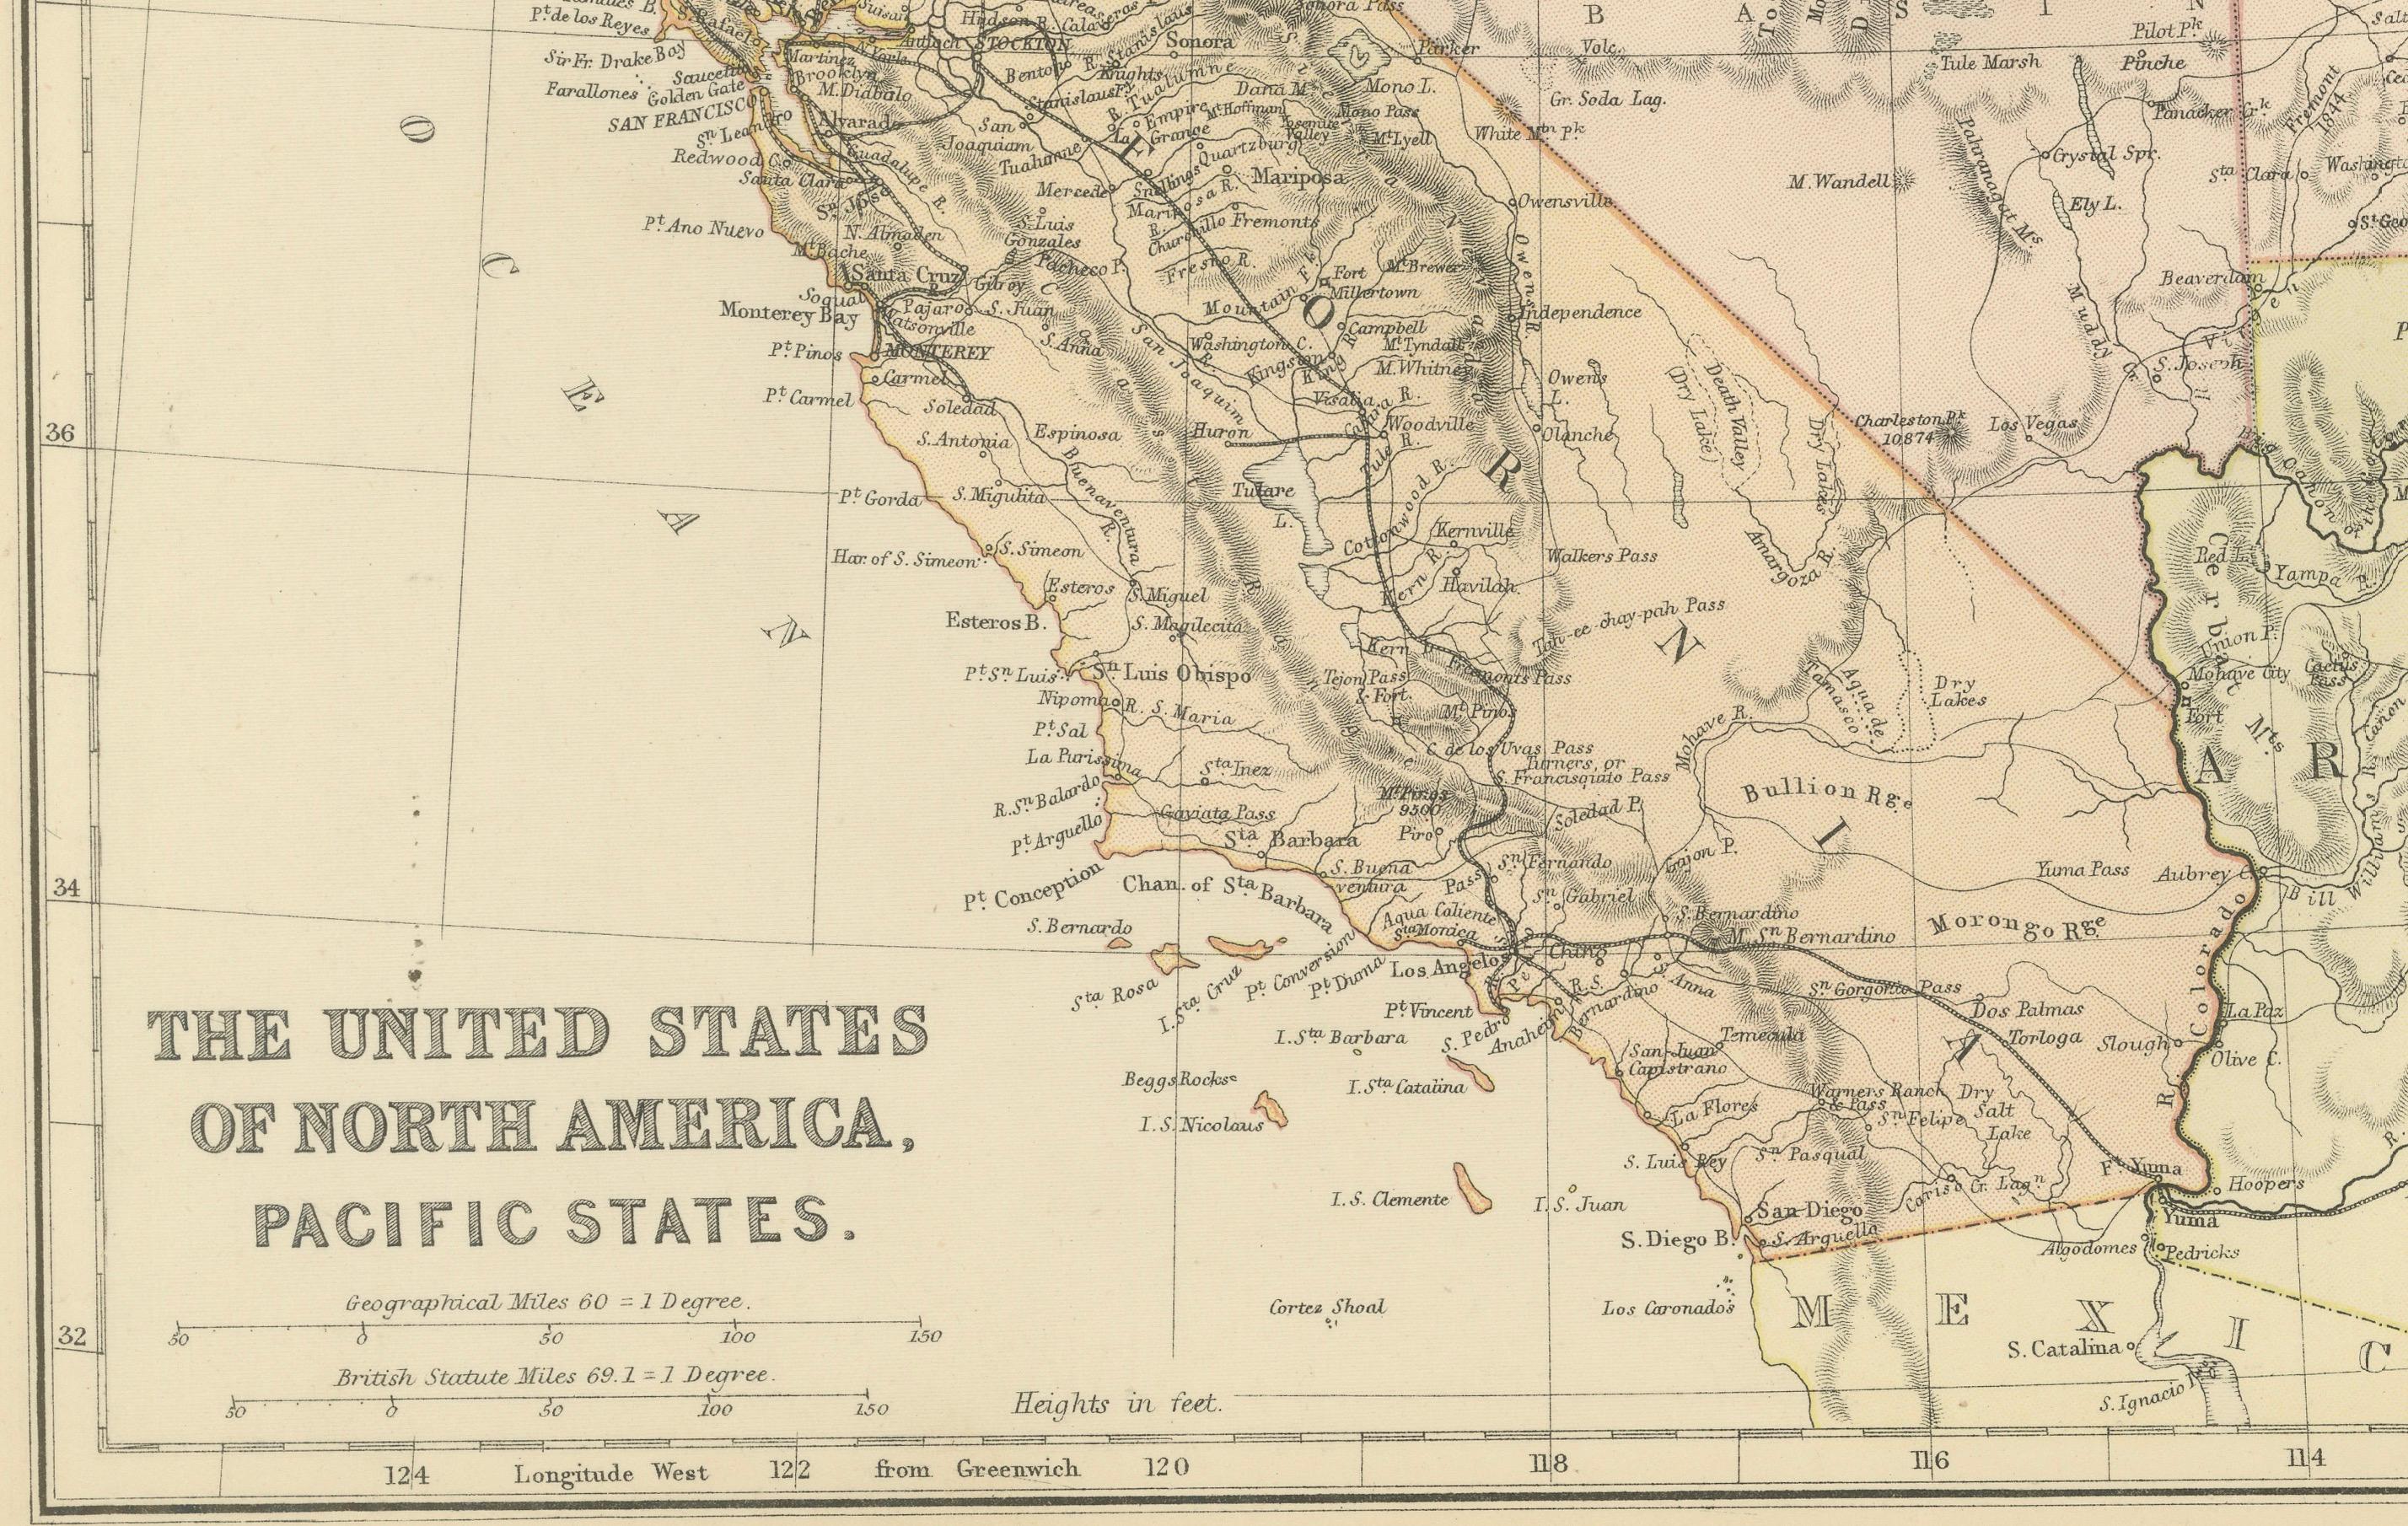 The map is from the same 1882 Blackie Atlas and focuses on the Pacific States of the United States of America during that period. Here are some details and historical context about this region at that time:

1. **Expansion and Settlement**: The